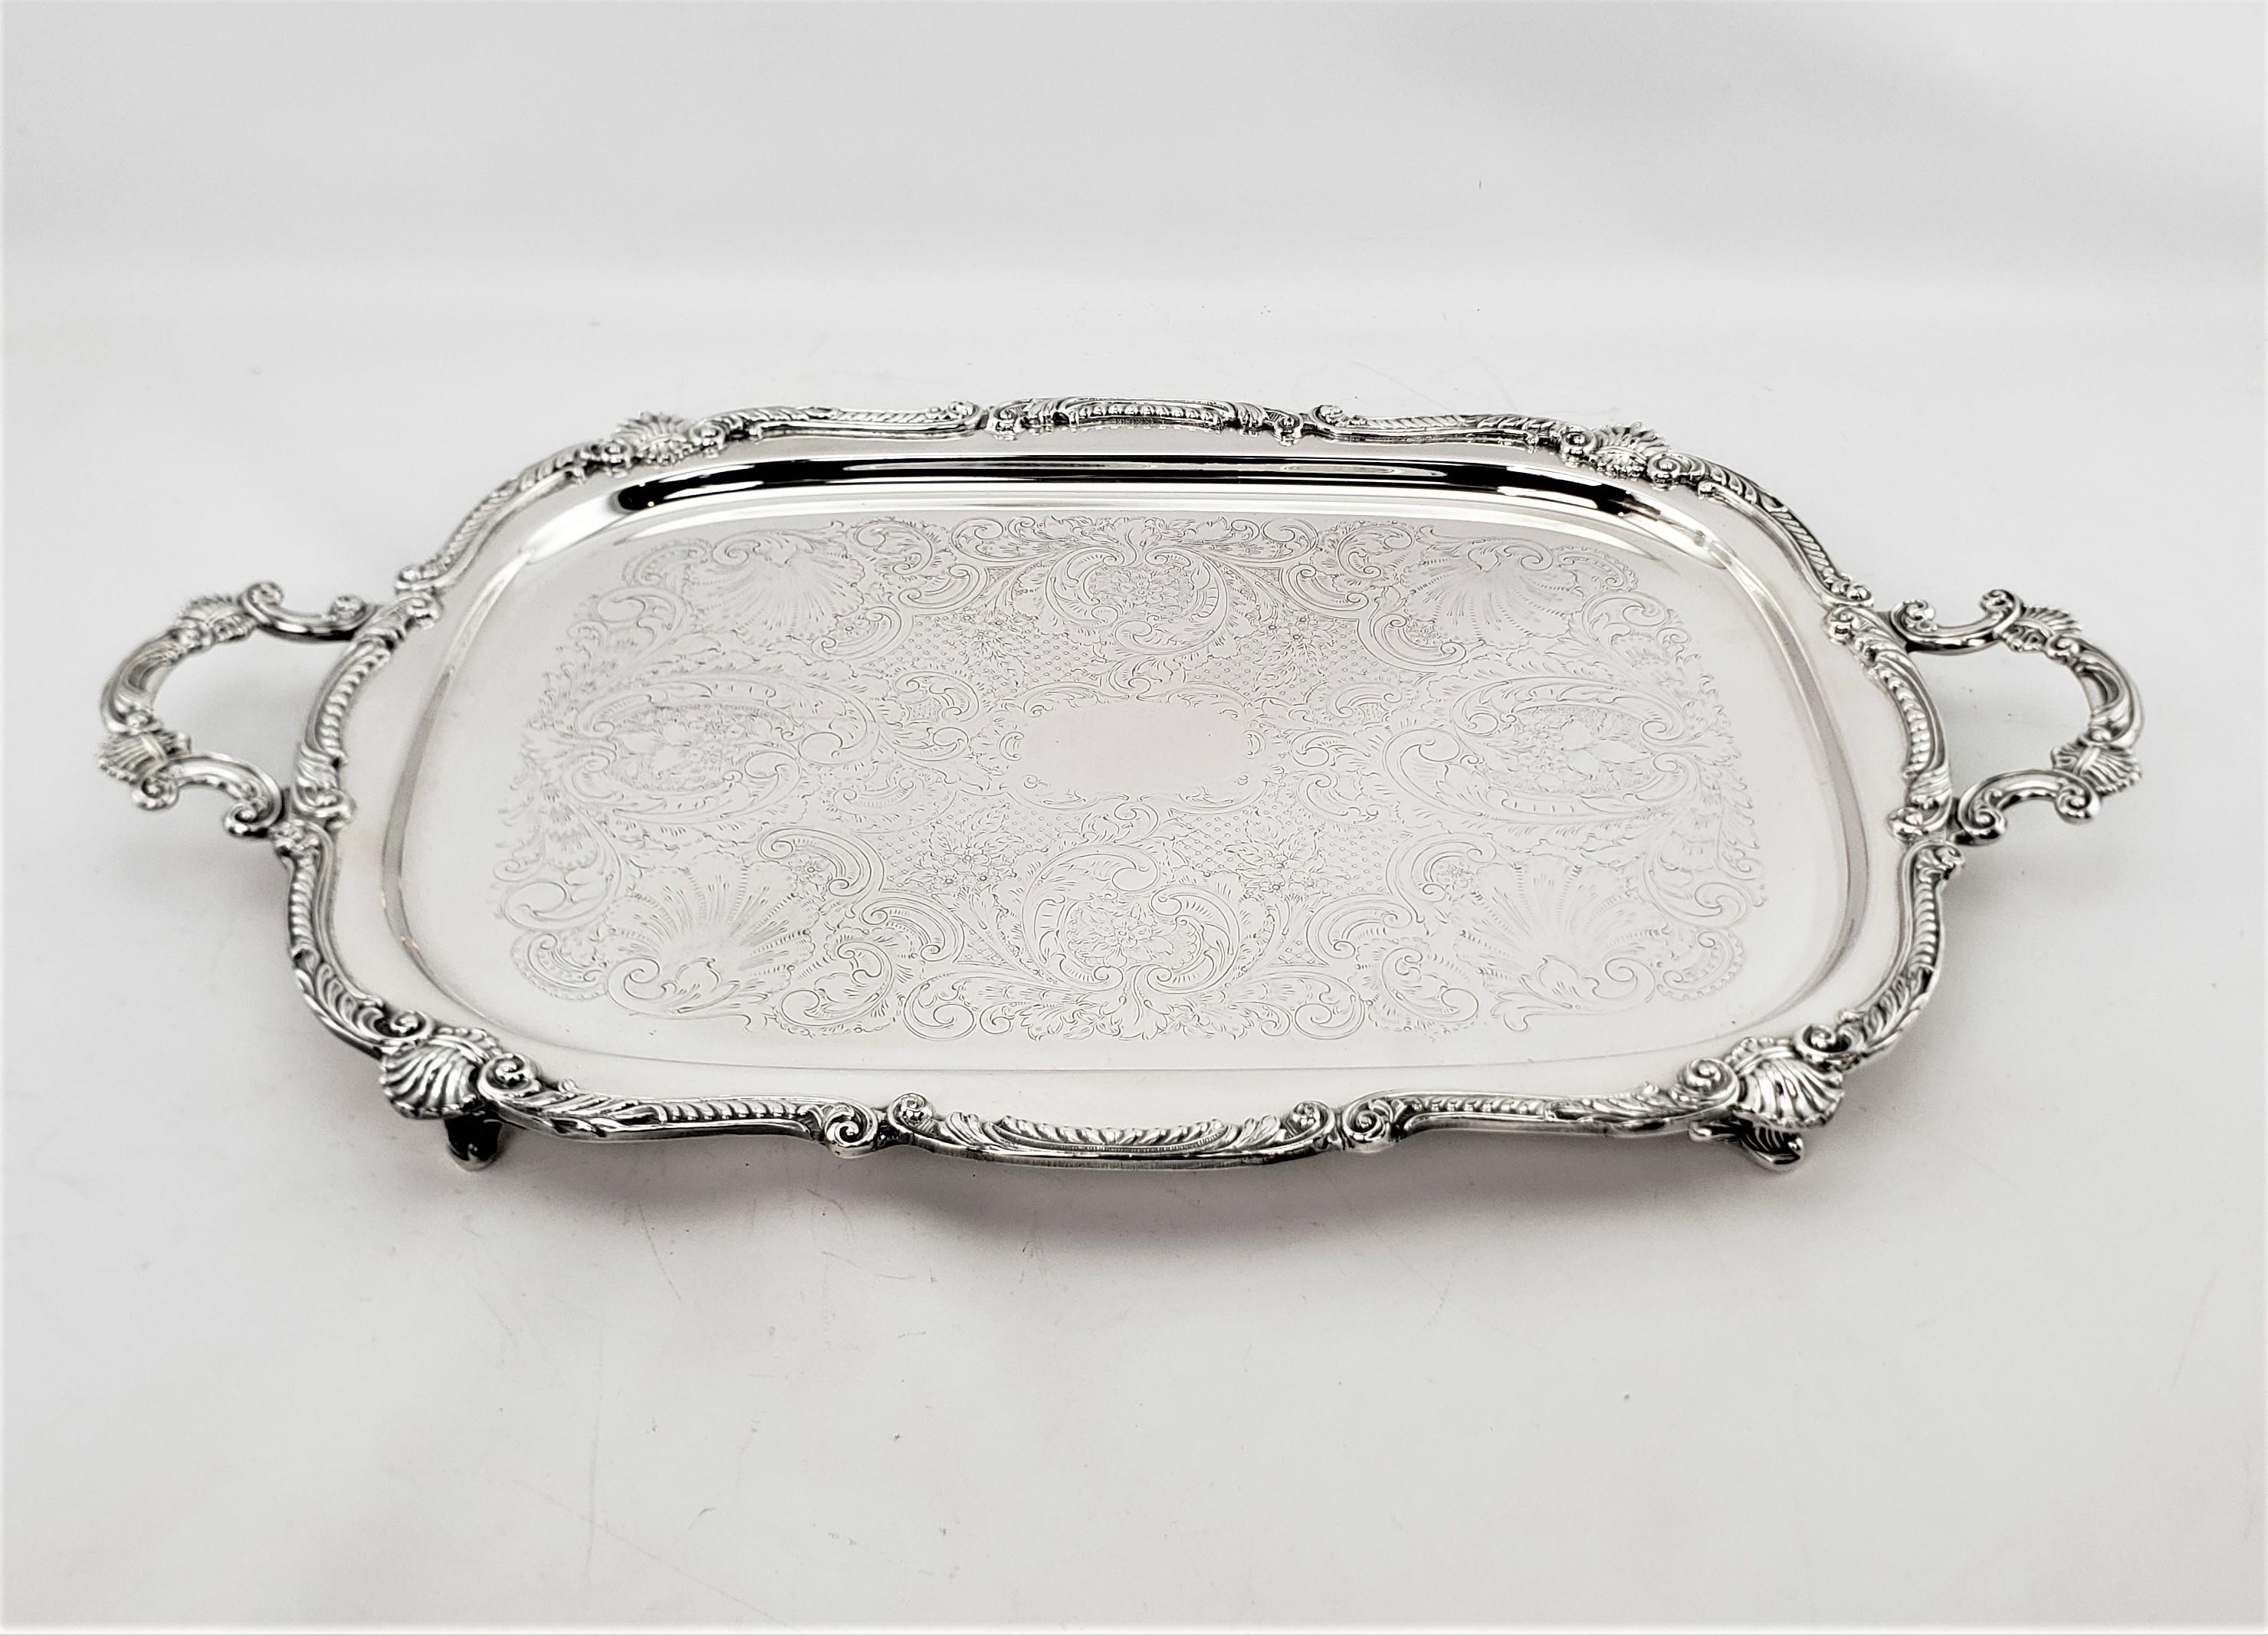 Victorian Antique English Rectangular Silver Plated Serving Tray with Stylized Shell Decor For Sale